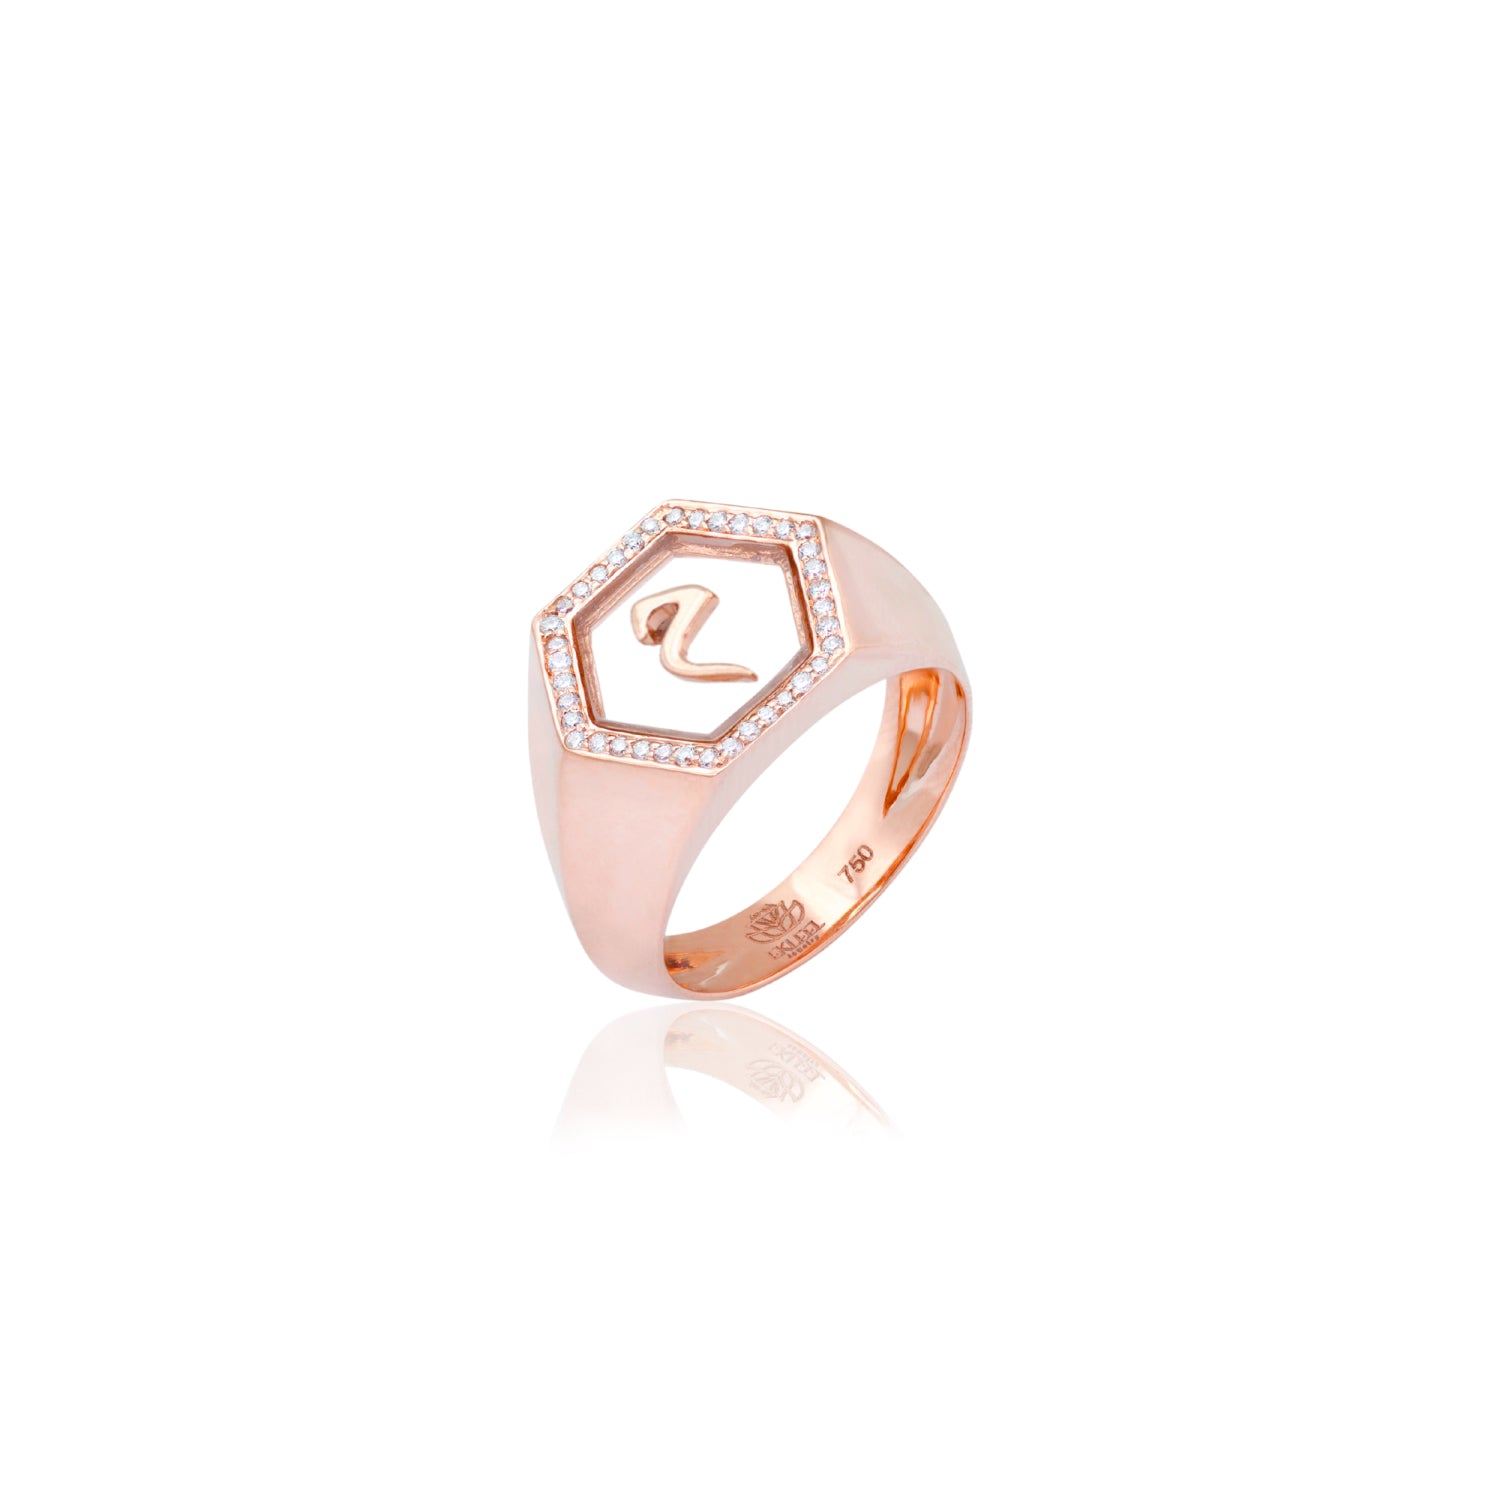 Qamoos 2.0 Letter م Plexiglass and Diamond Signet Ring in Rose Gold